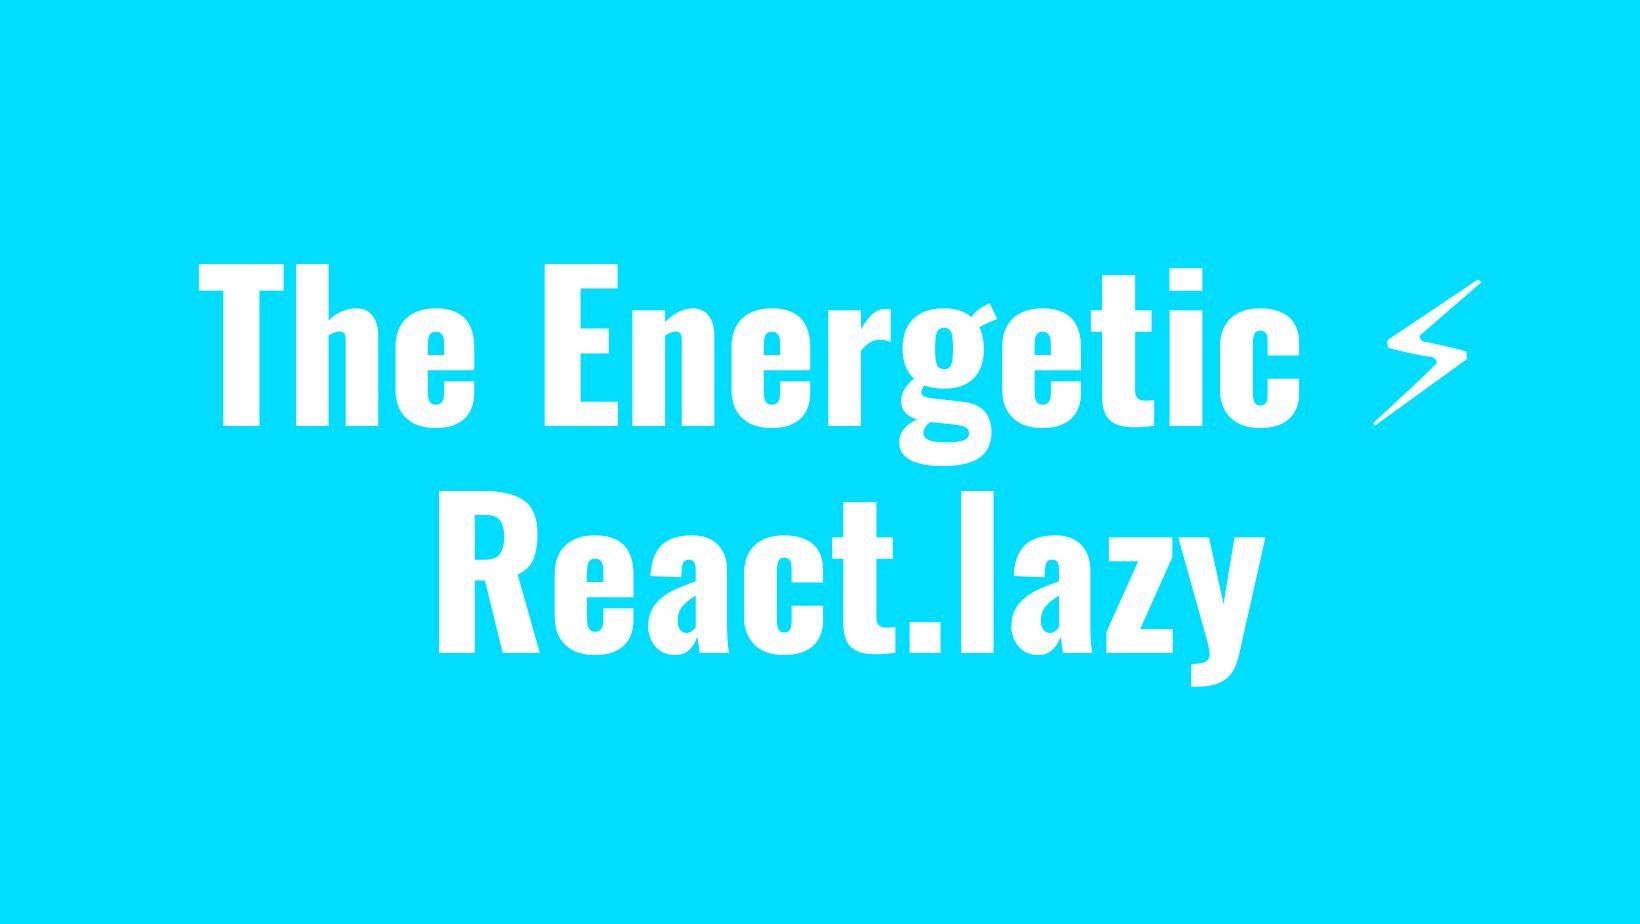 The Energetic React Lazy